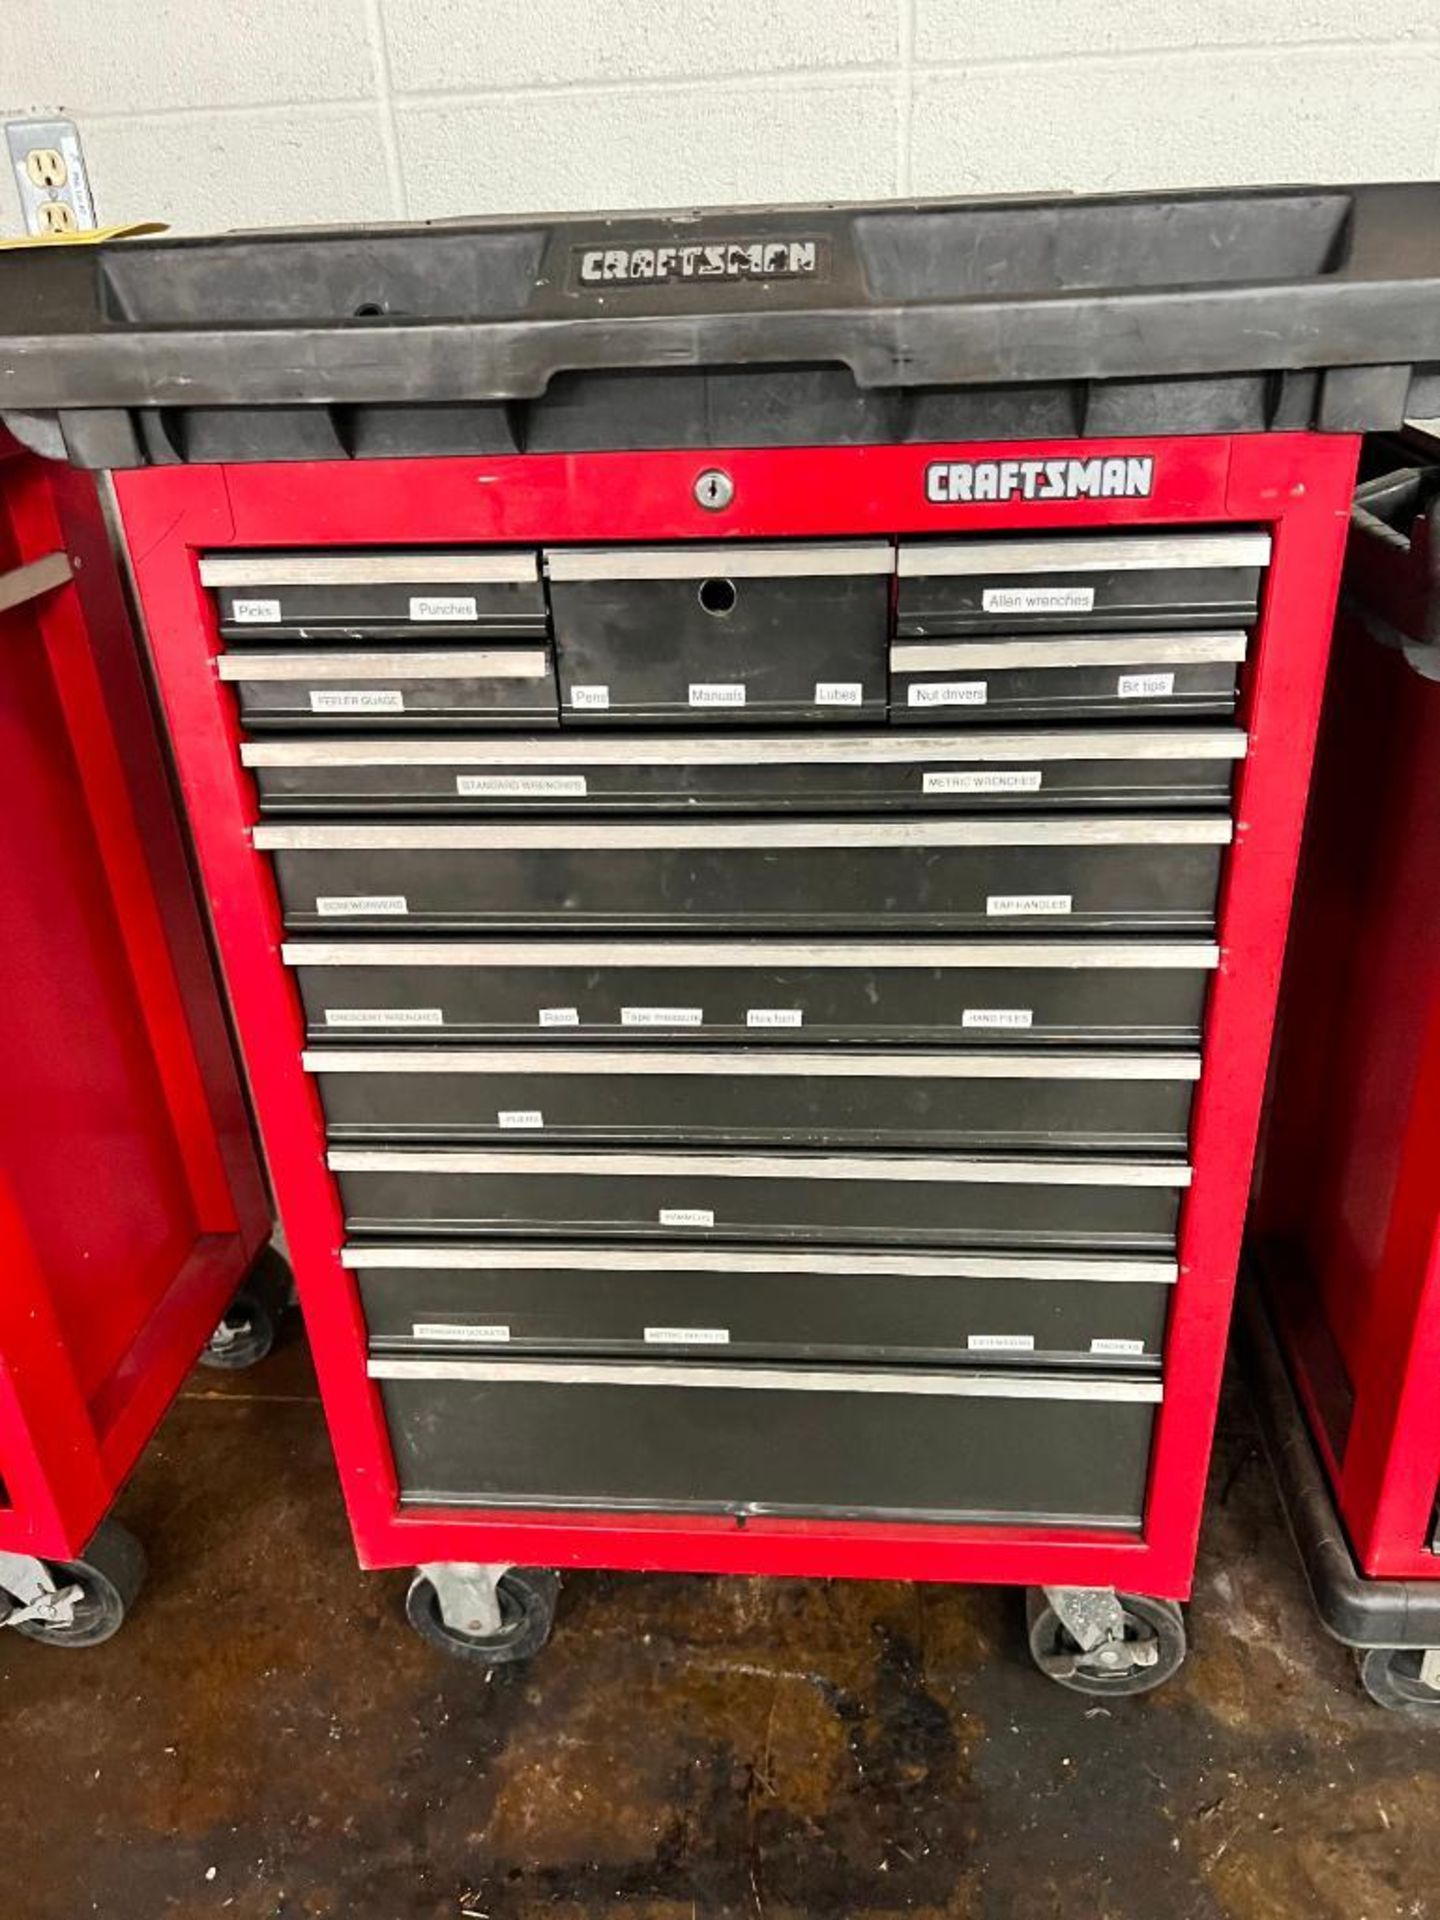 Craftsman 12-Drawer Rolling Toolbox w/ Content of Assorted Tools - Image 2 of 11